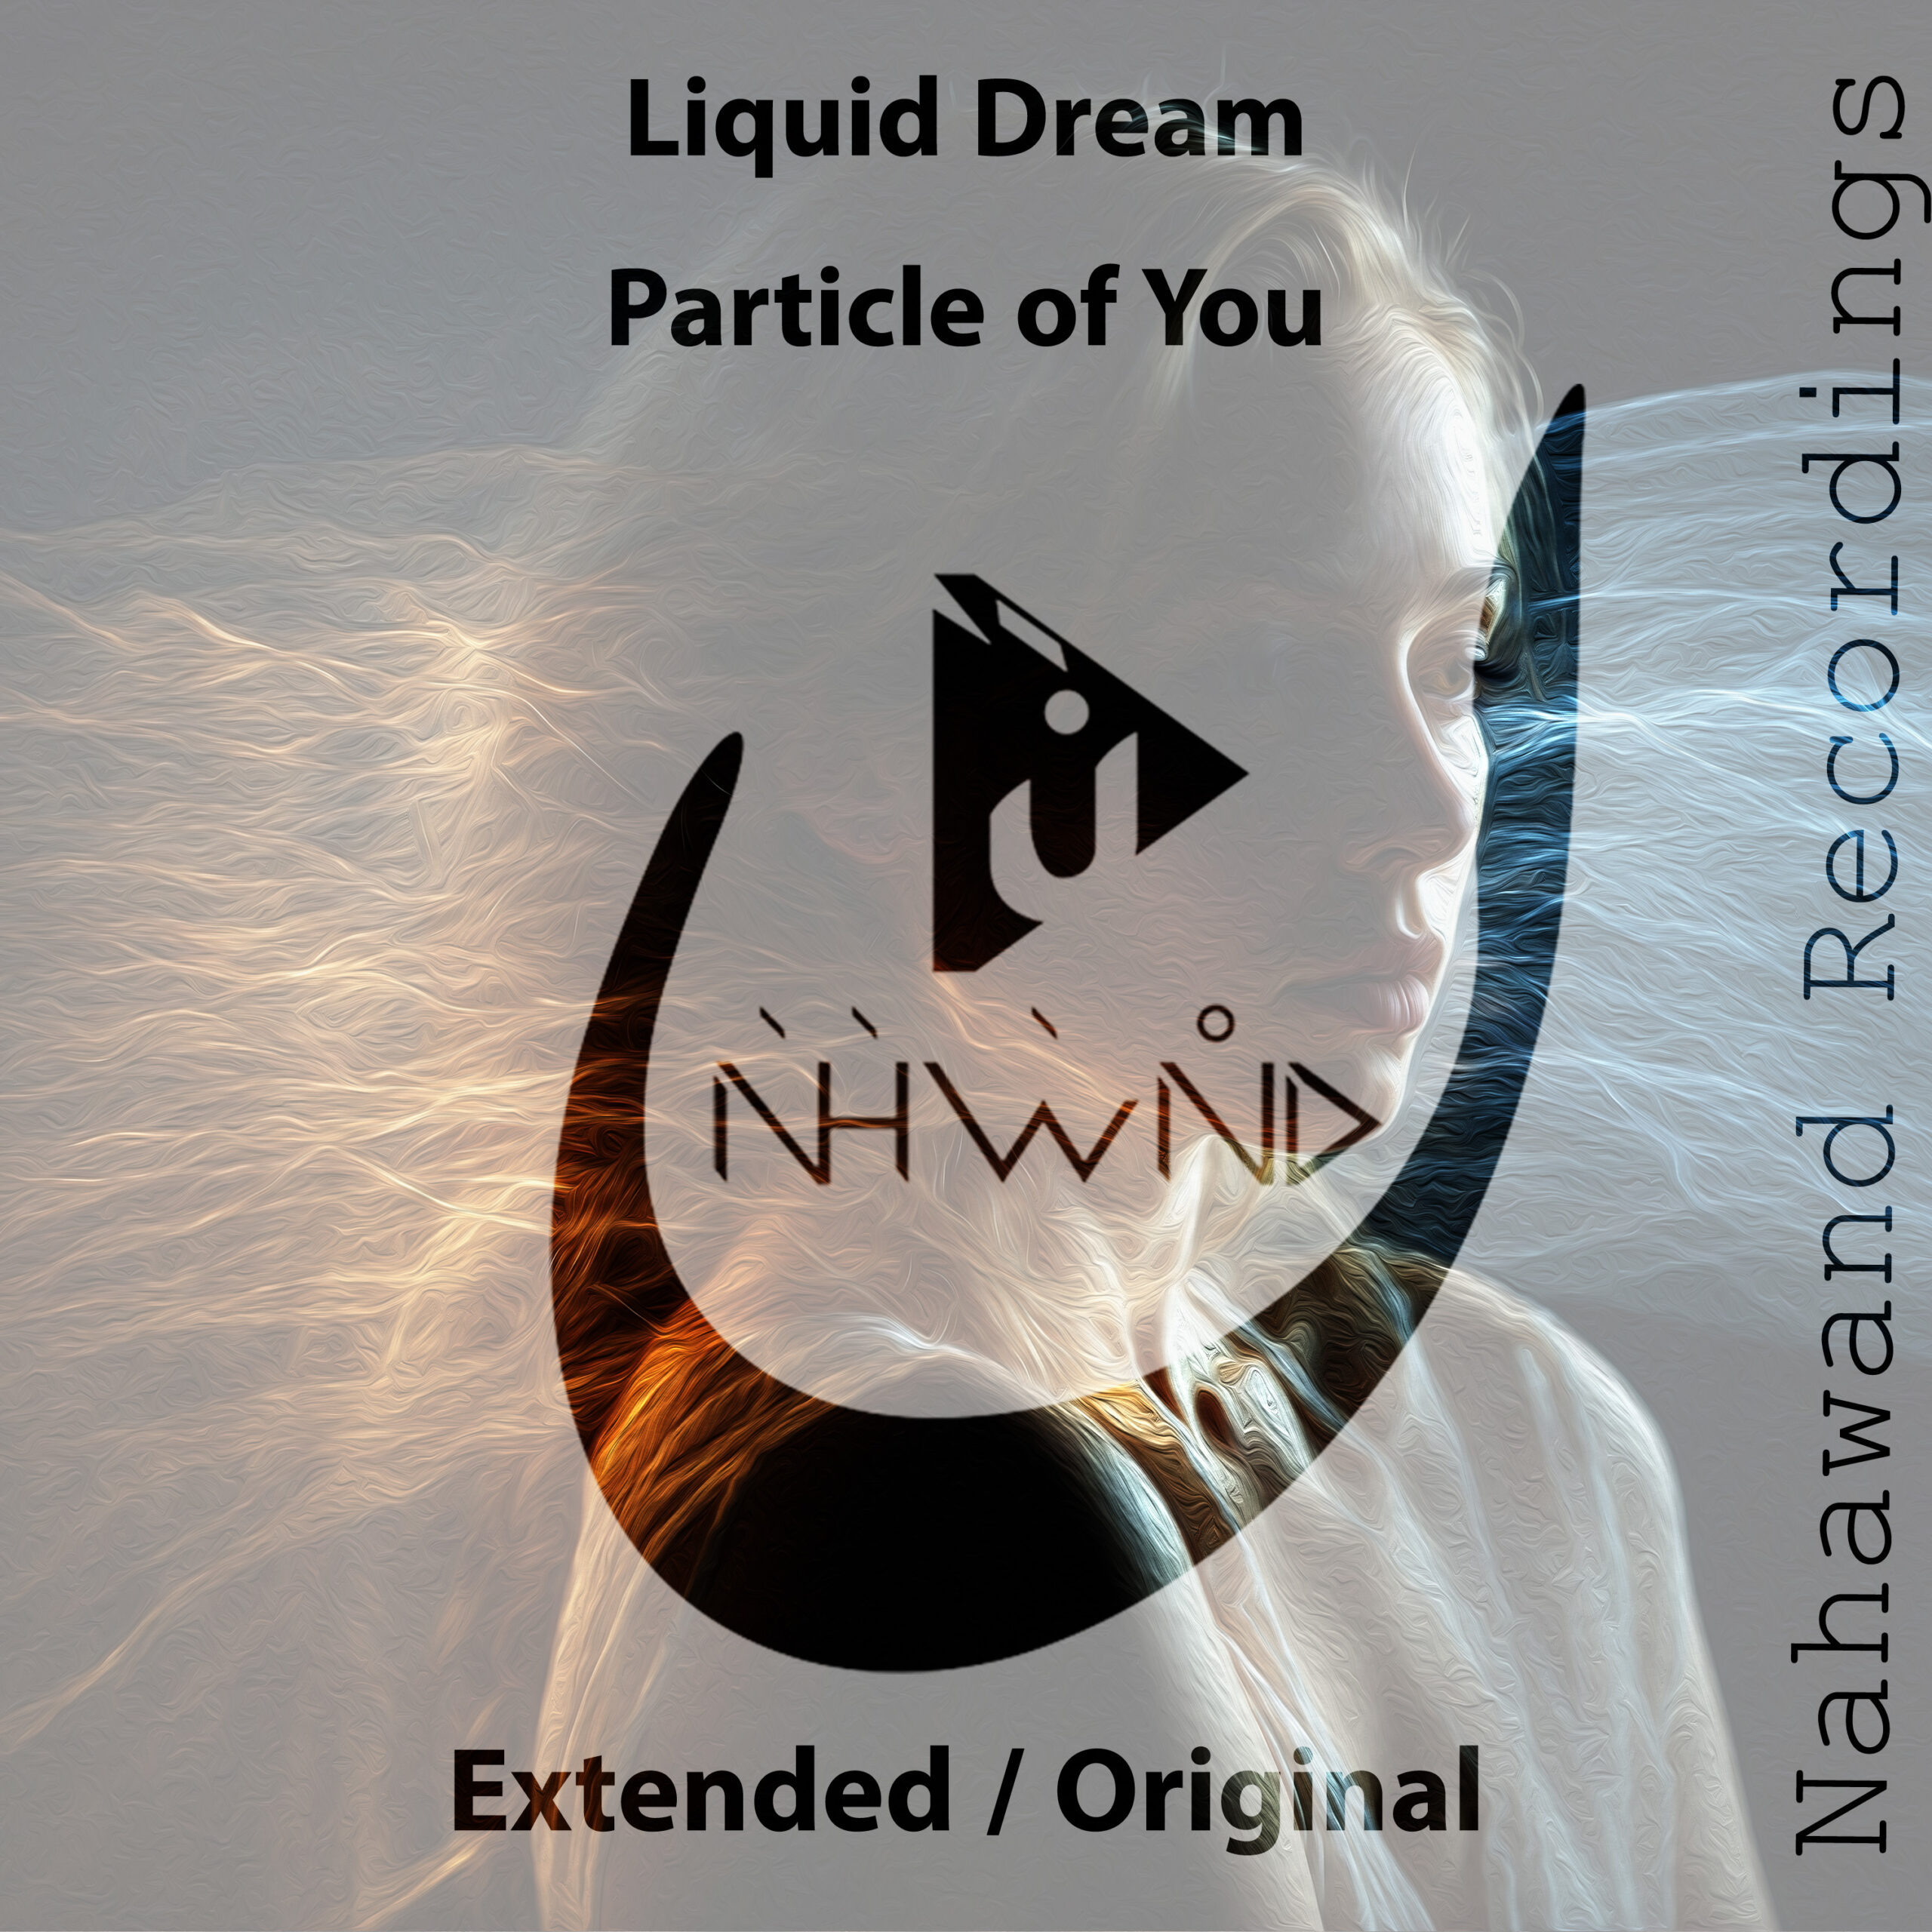 Liquid Dream presents Particle of You on Nahawand Recordings